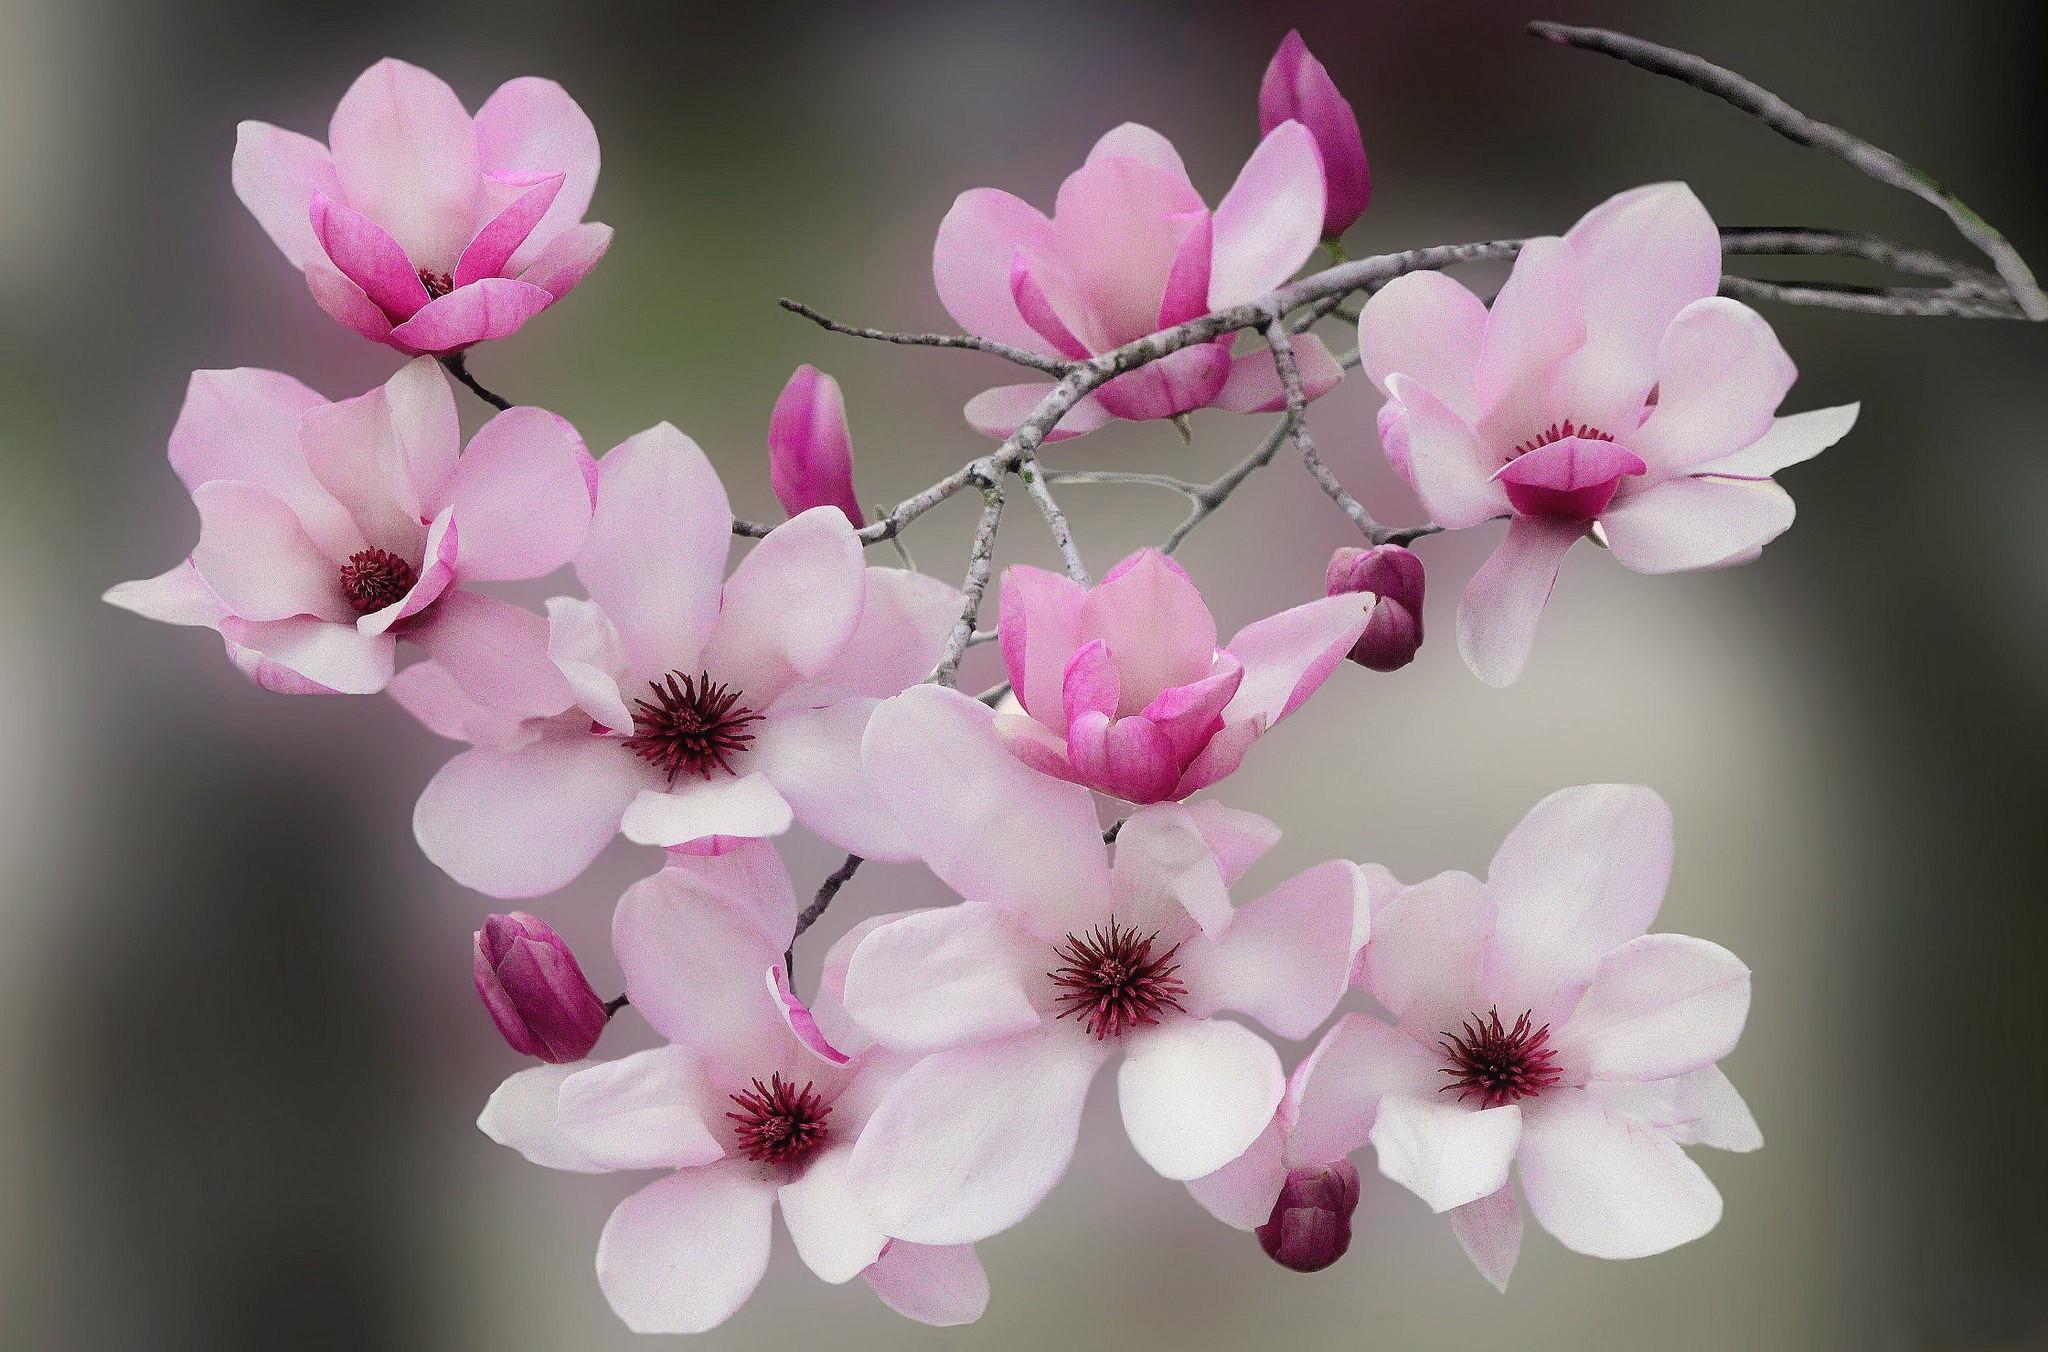 Flower Flowering Scent Beautiful Spring Magnolia Blooming Blossoms